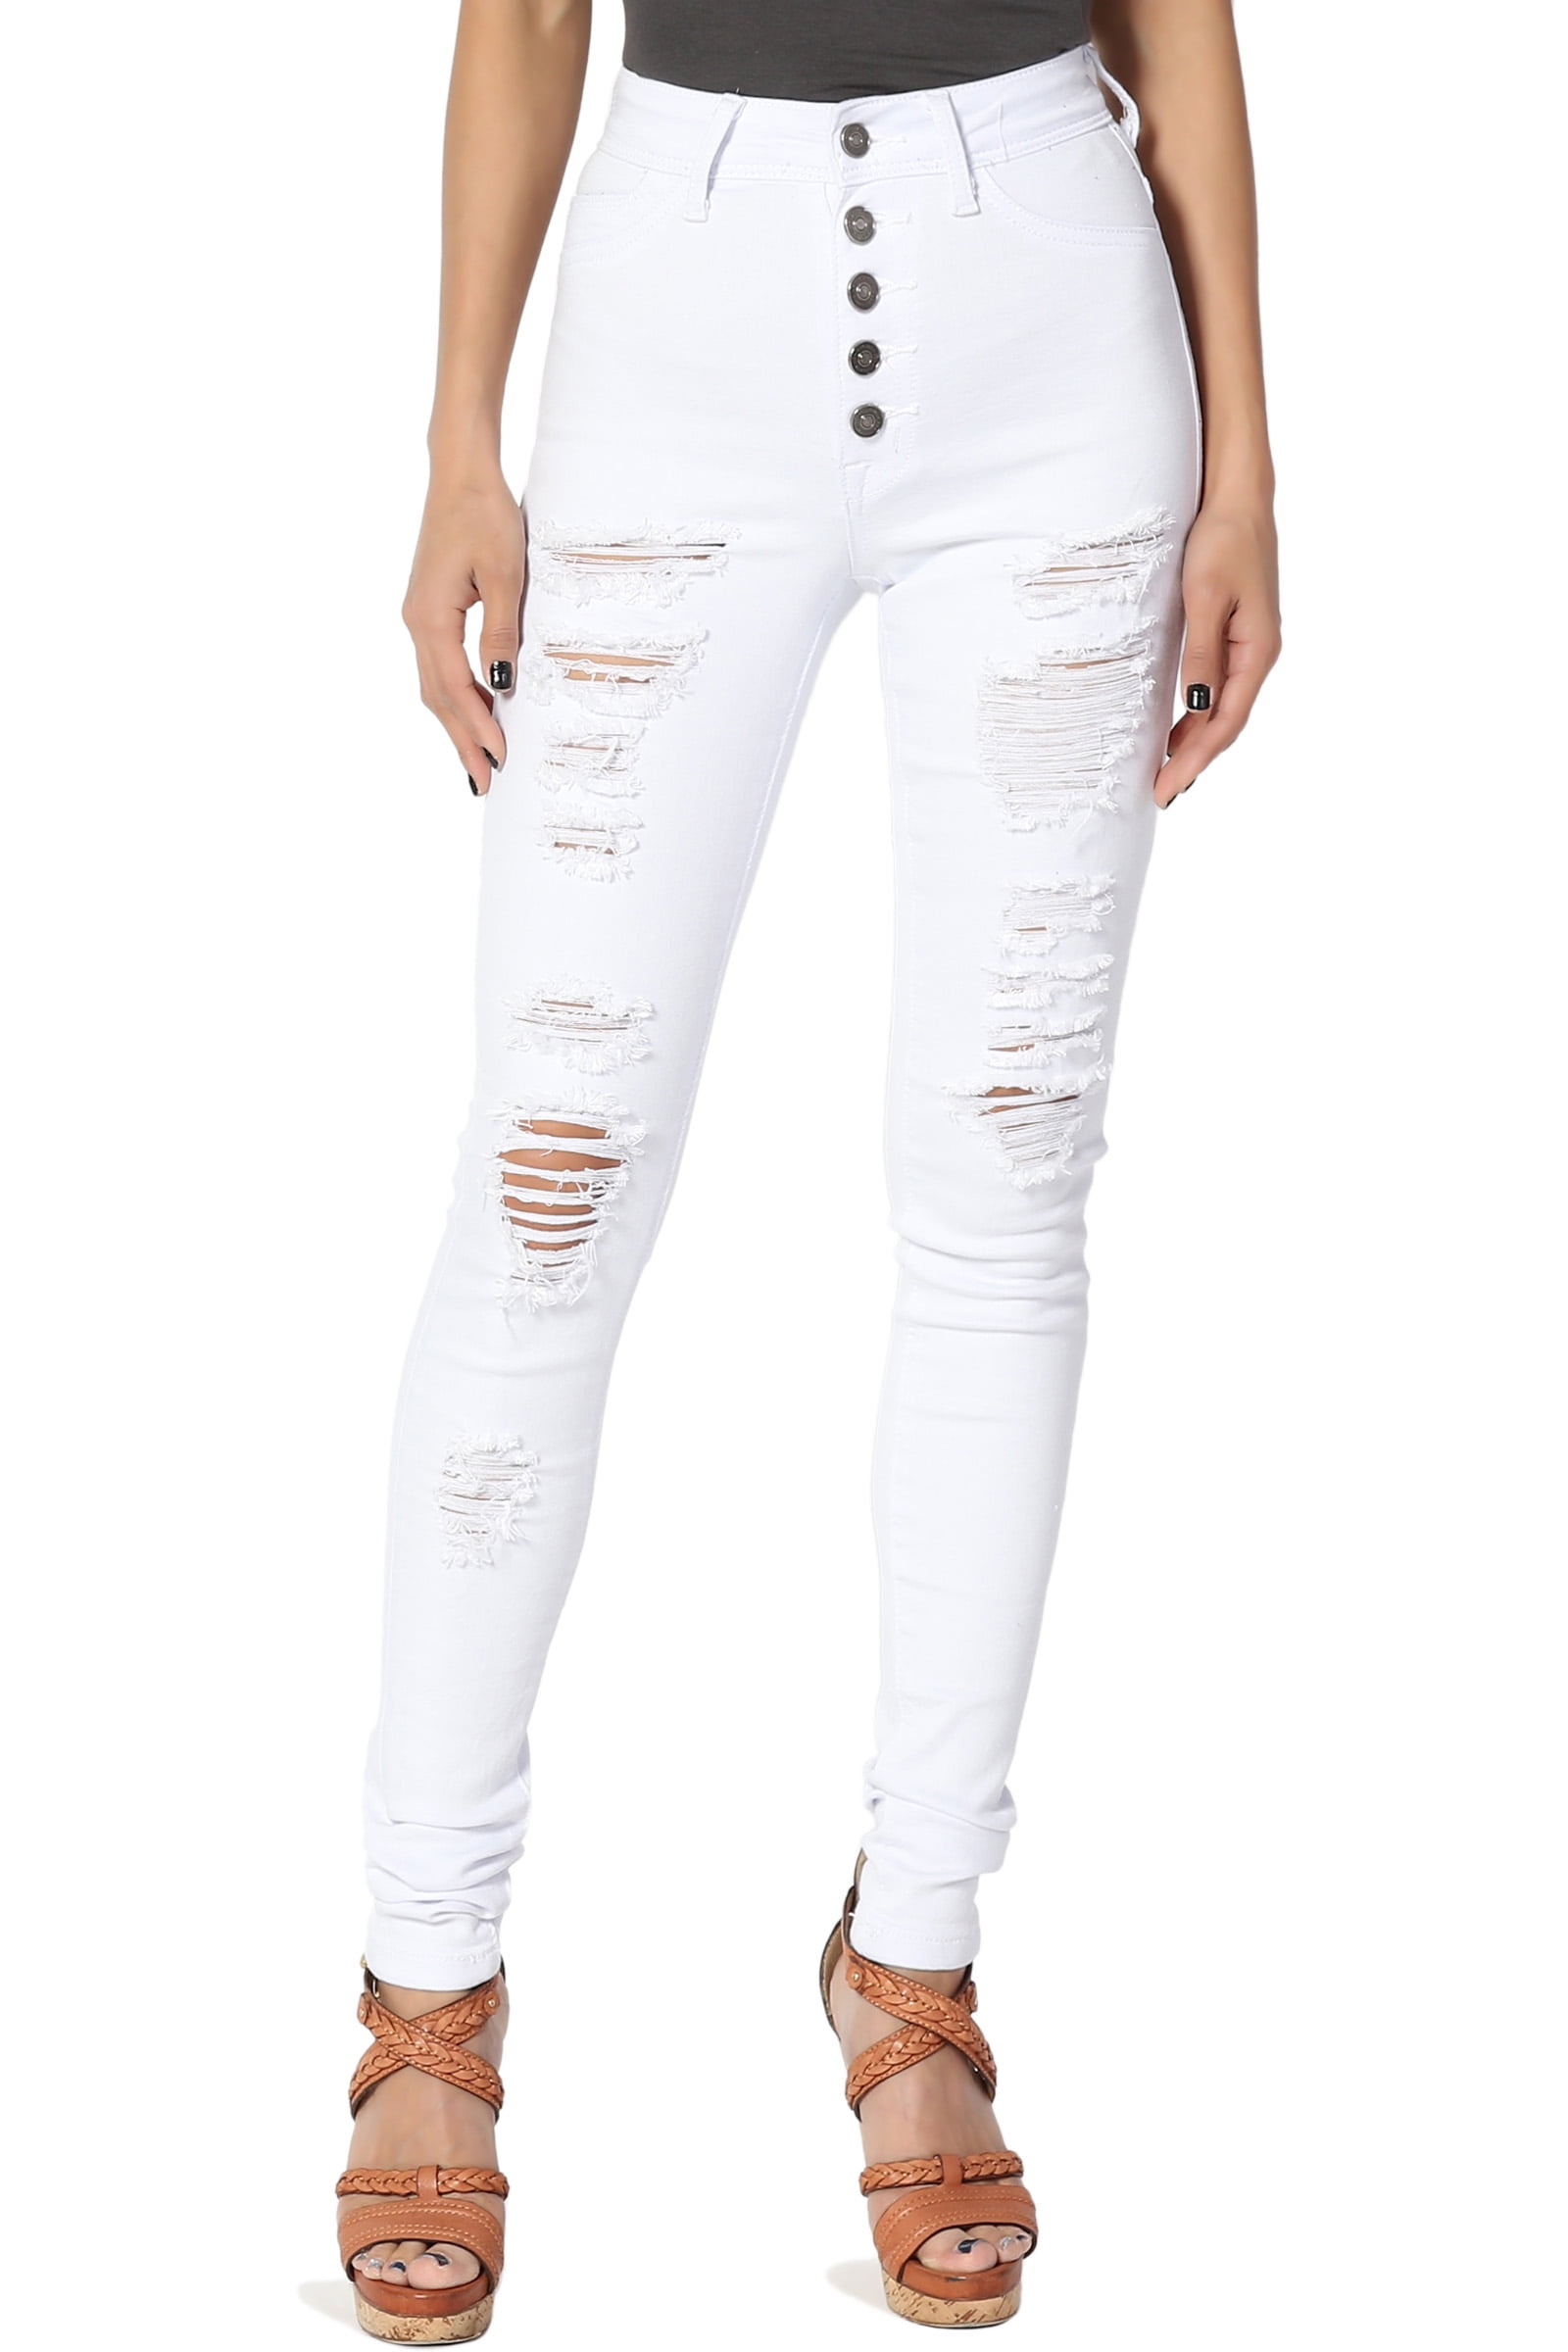 ladies high waisted white jeans